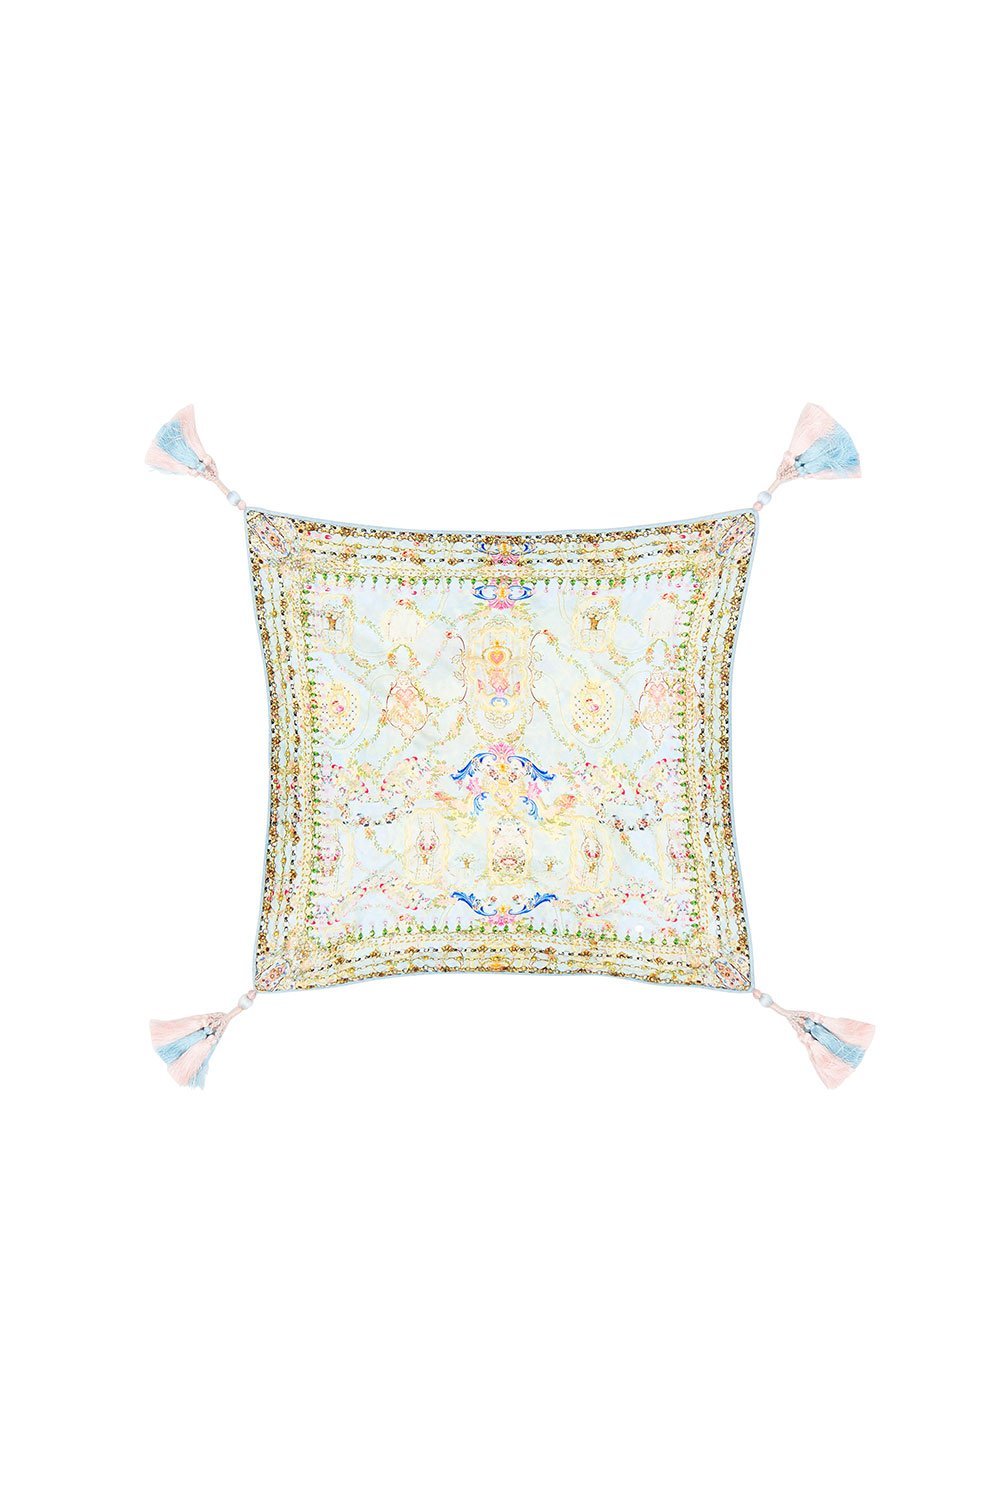 SMALL SQUARE CUSHION VERSAILLES SKY